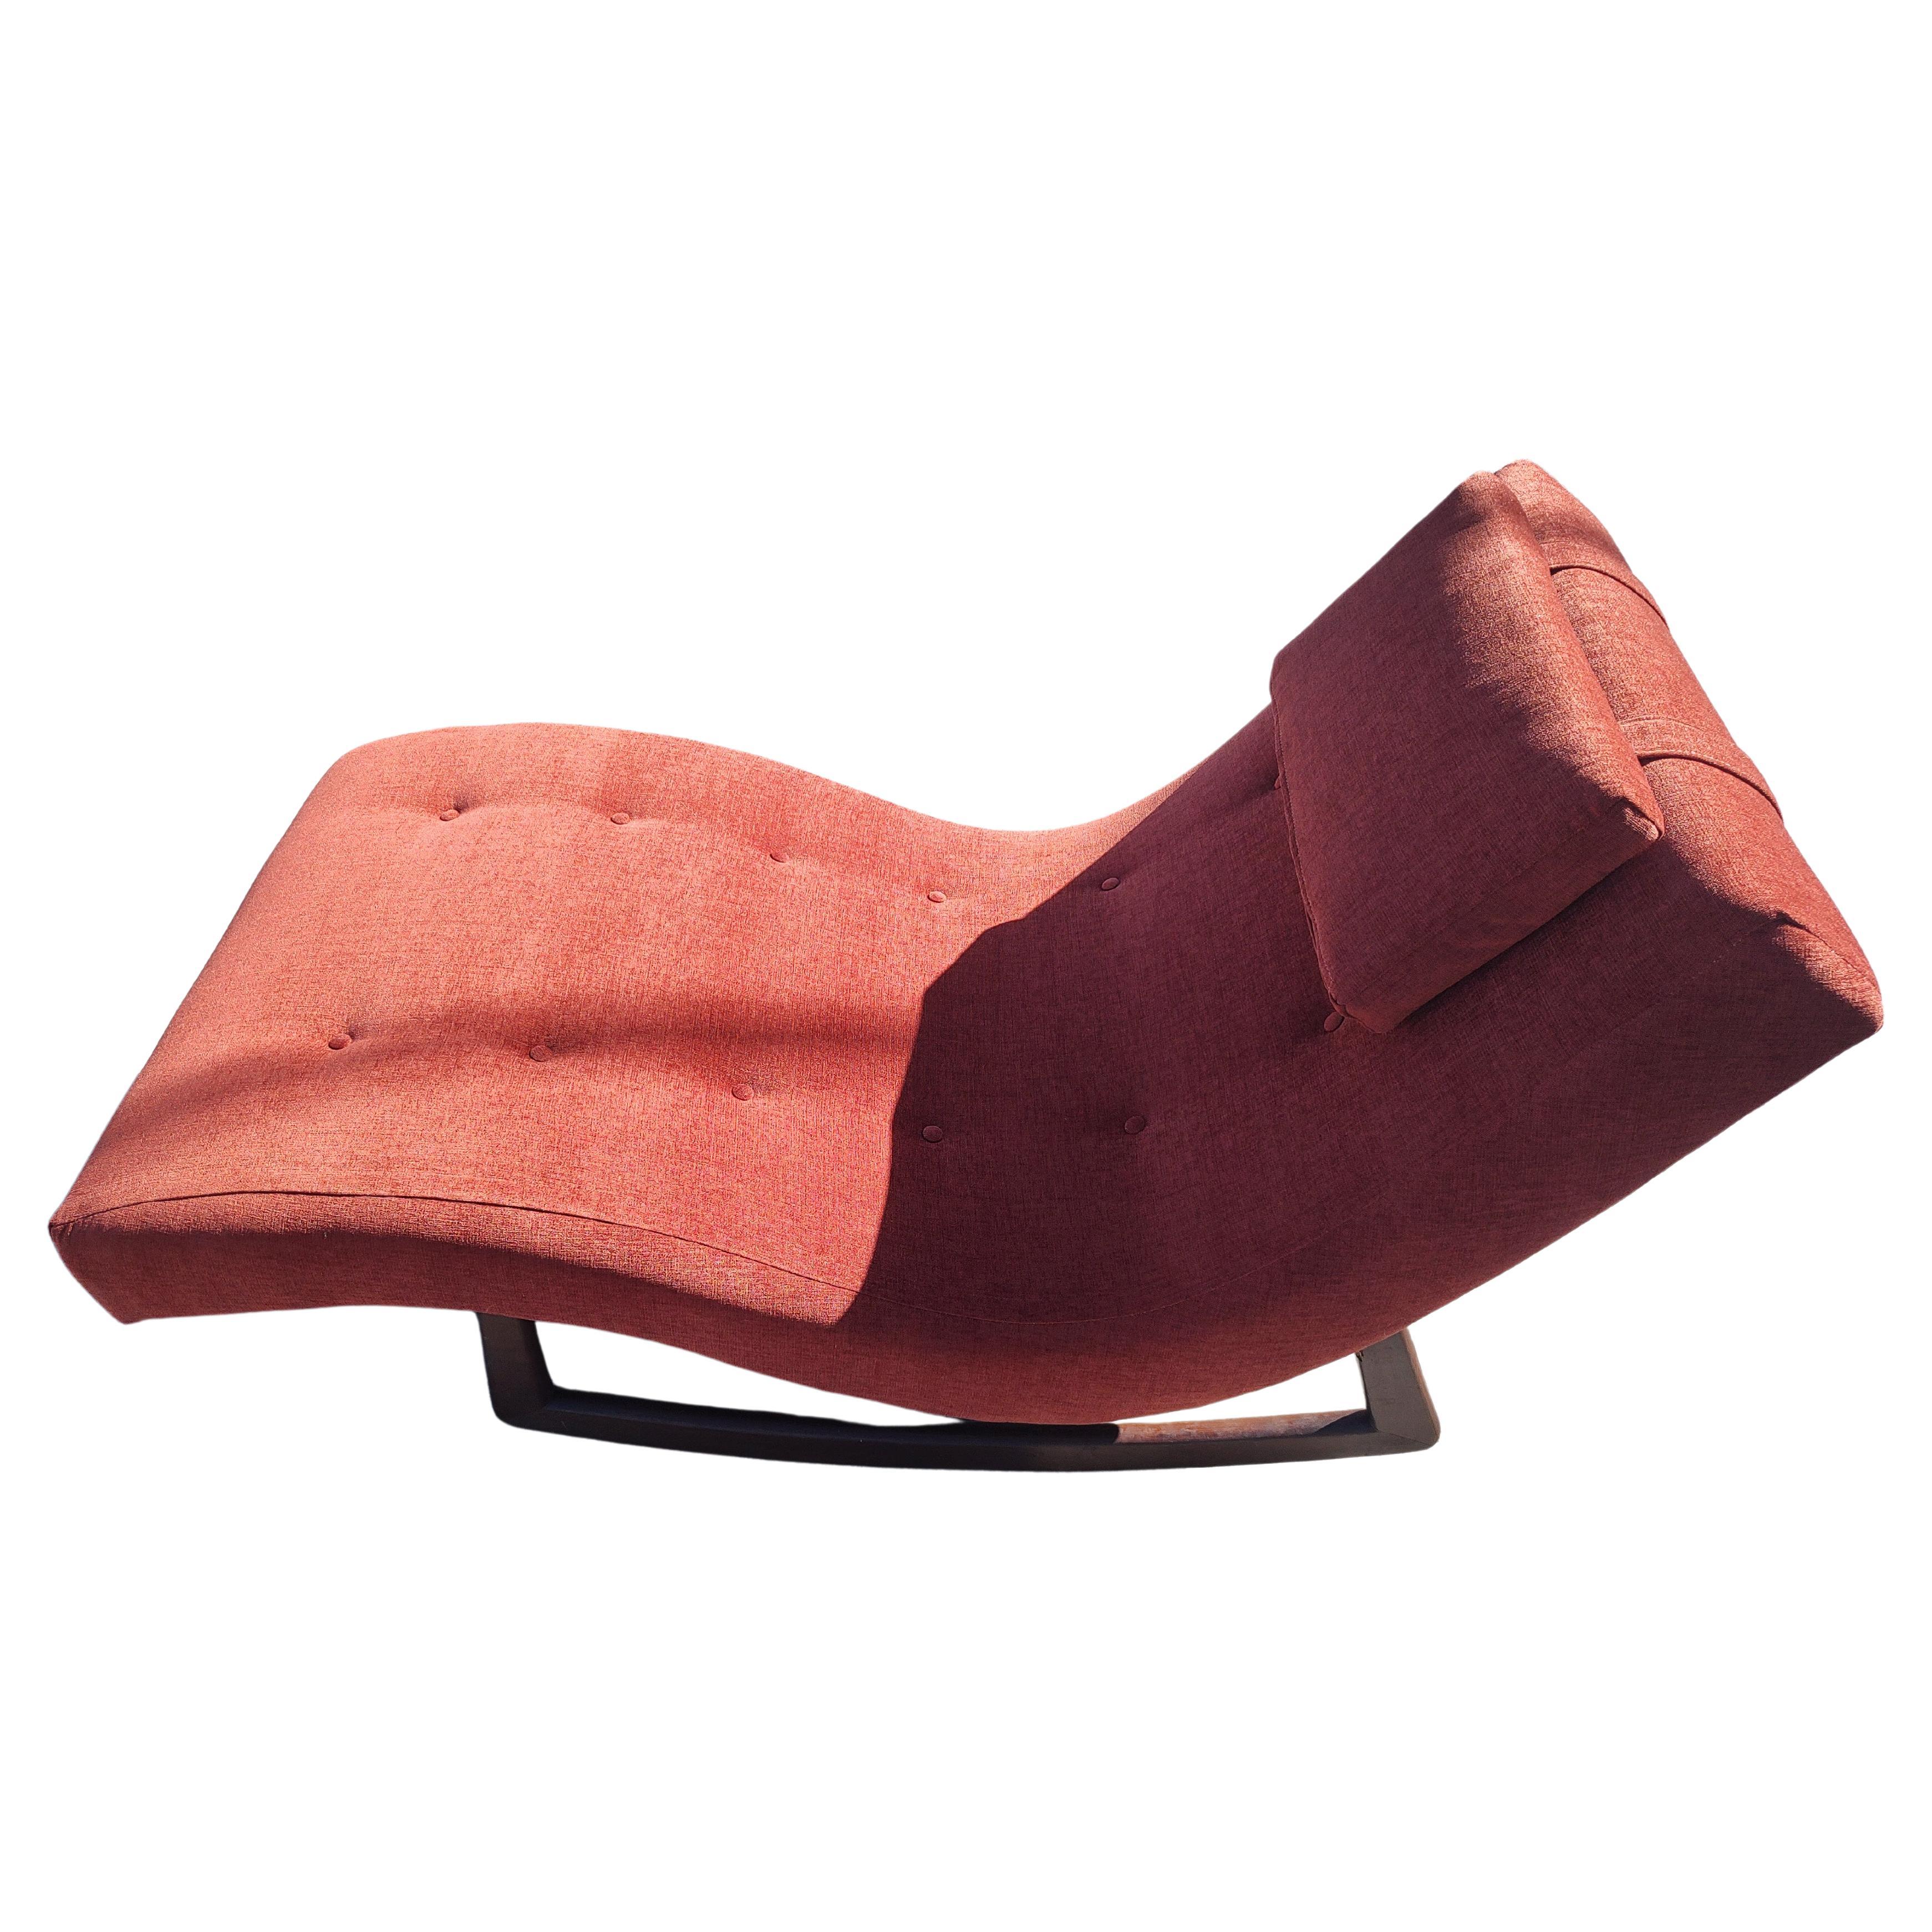 Fabulous Adrian Pearsall Wave Rocker Chaise Lounge Chair created in about 1960 with a walnut in case and totally reupholstered in a soft textured Boucle like material. Built in headrest pillow for added comfort. Such an amazing design built to